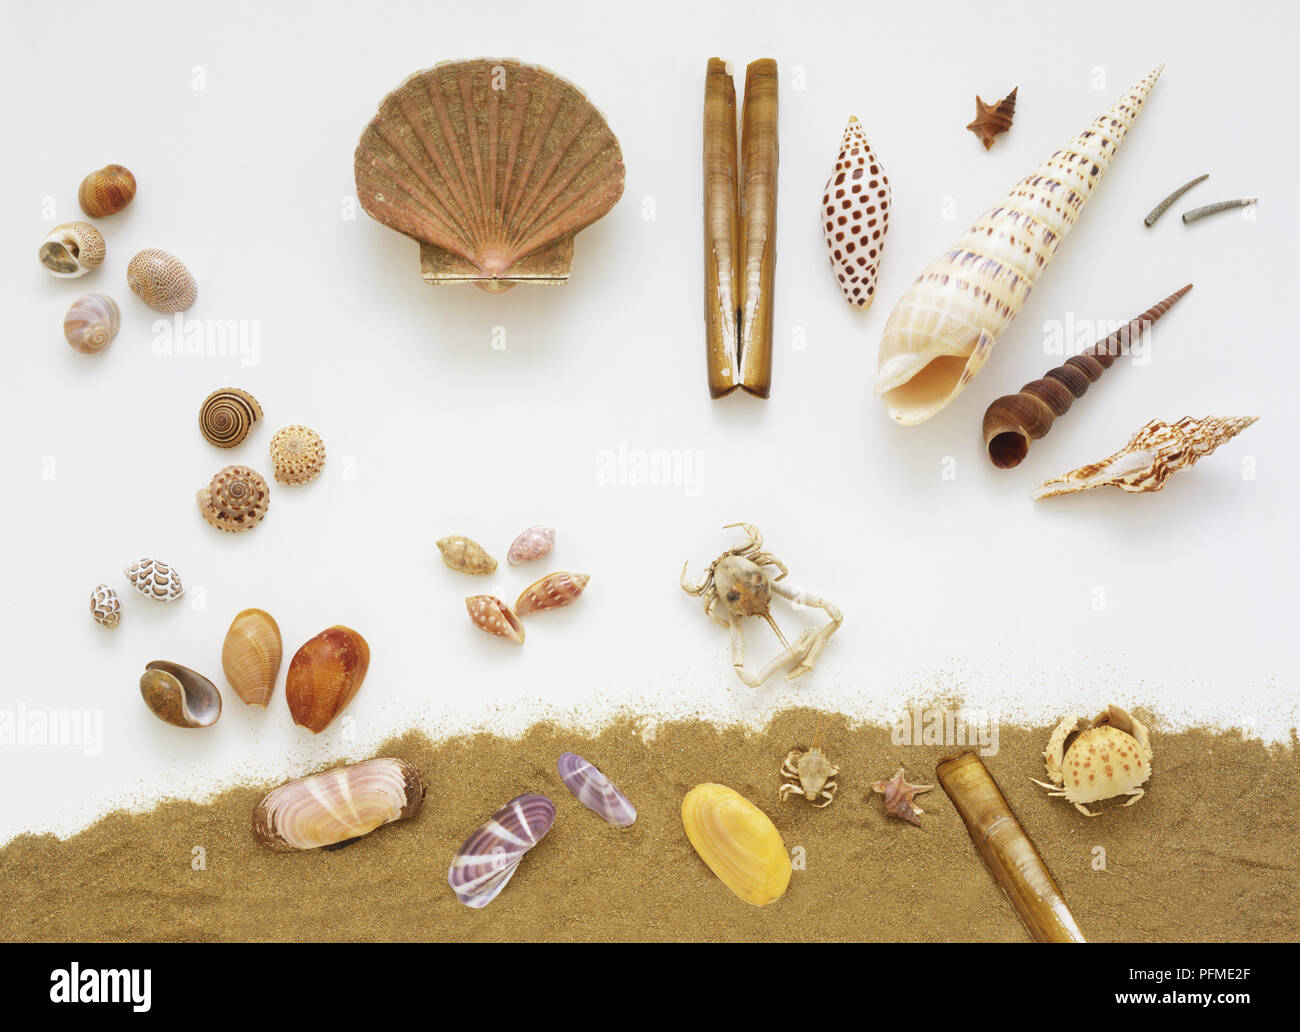 A selection of seashells, including necklace shell, sundial shell, spotted diggers, bubbles, canoes, scrapers, razor shell, junonia volute, marlinspike auger, indian turritella, spindle shell, and crabs Stock Photo